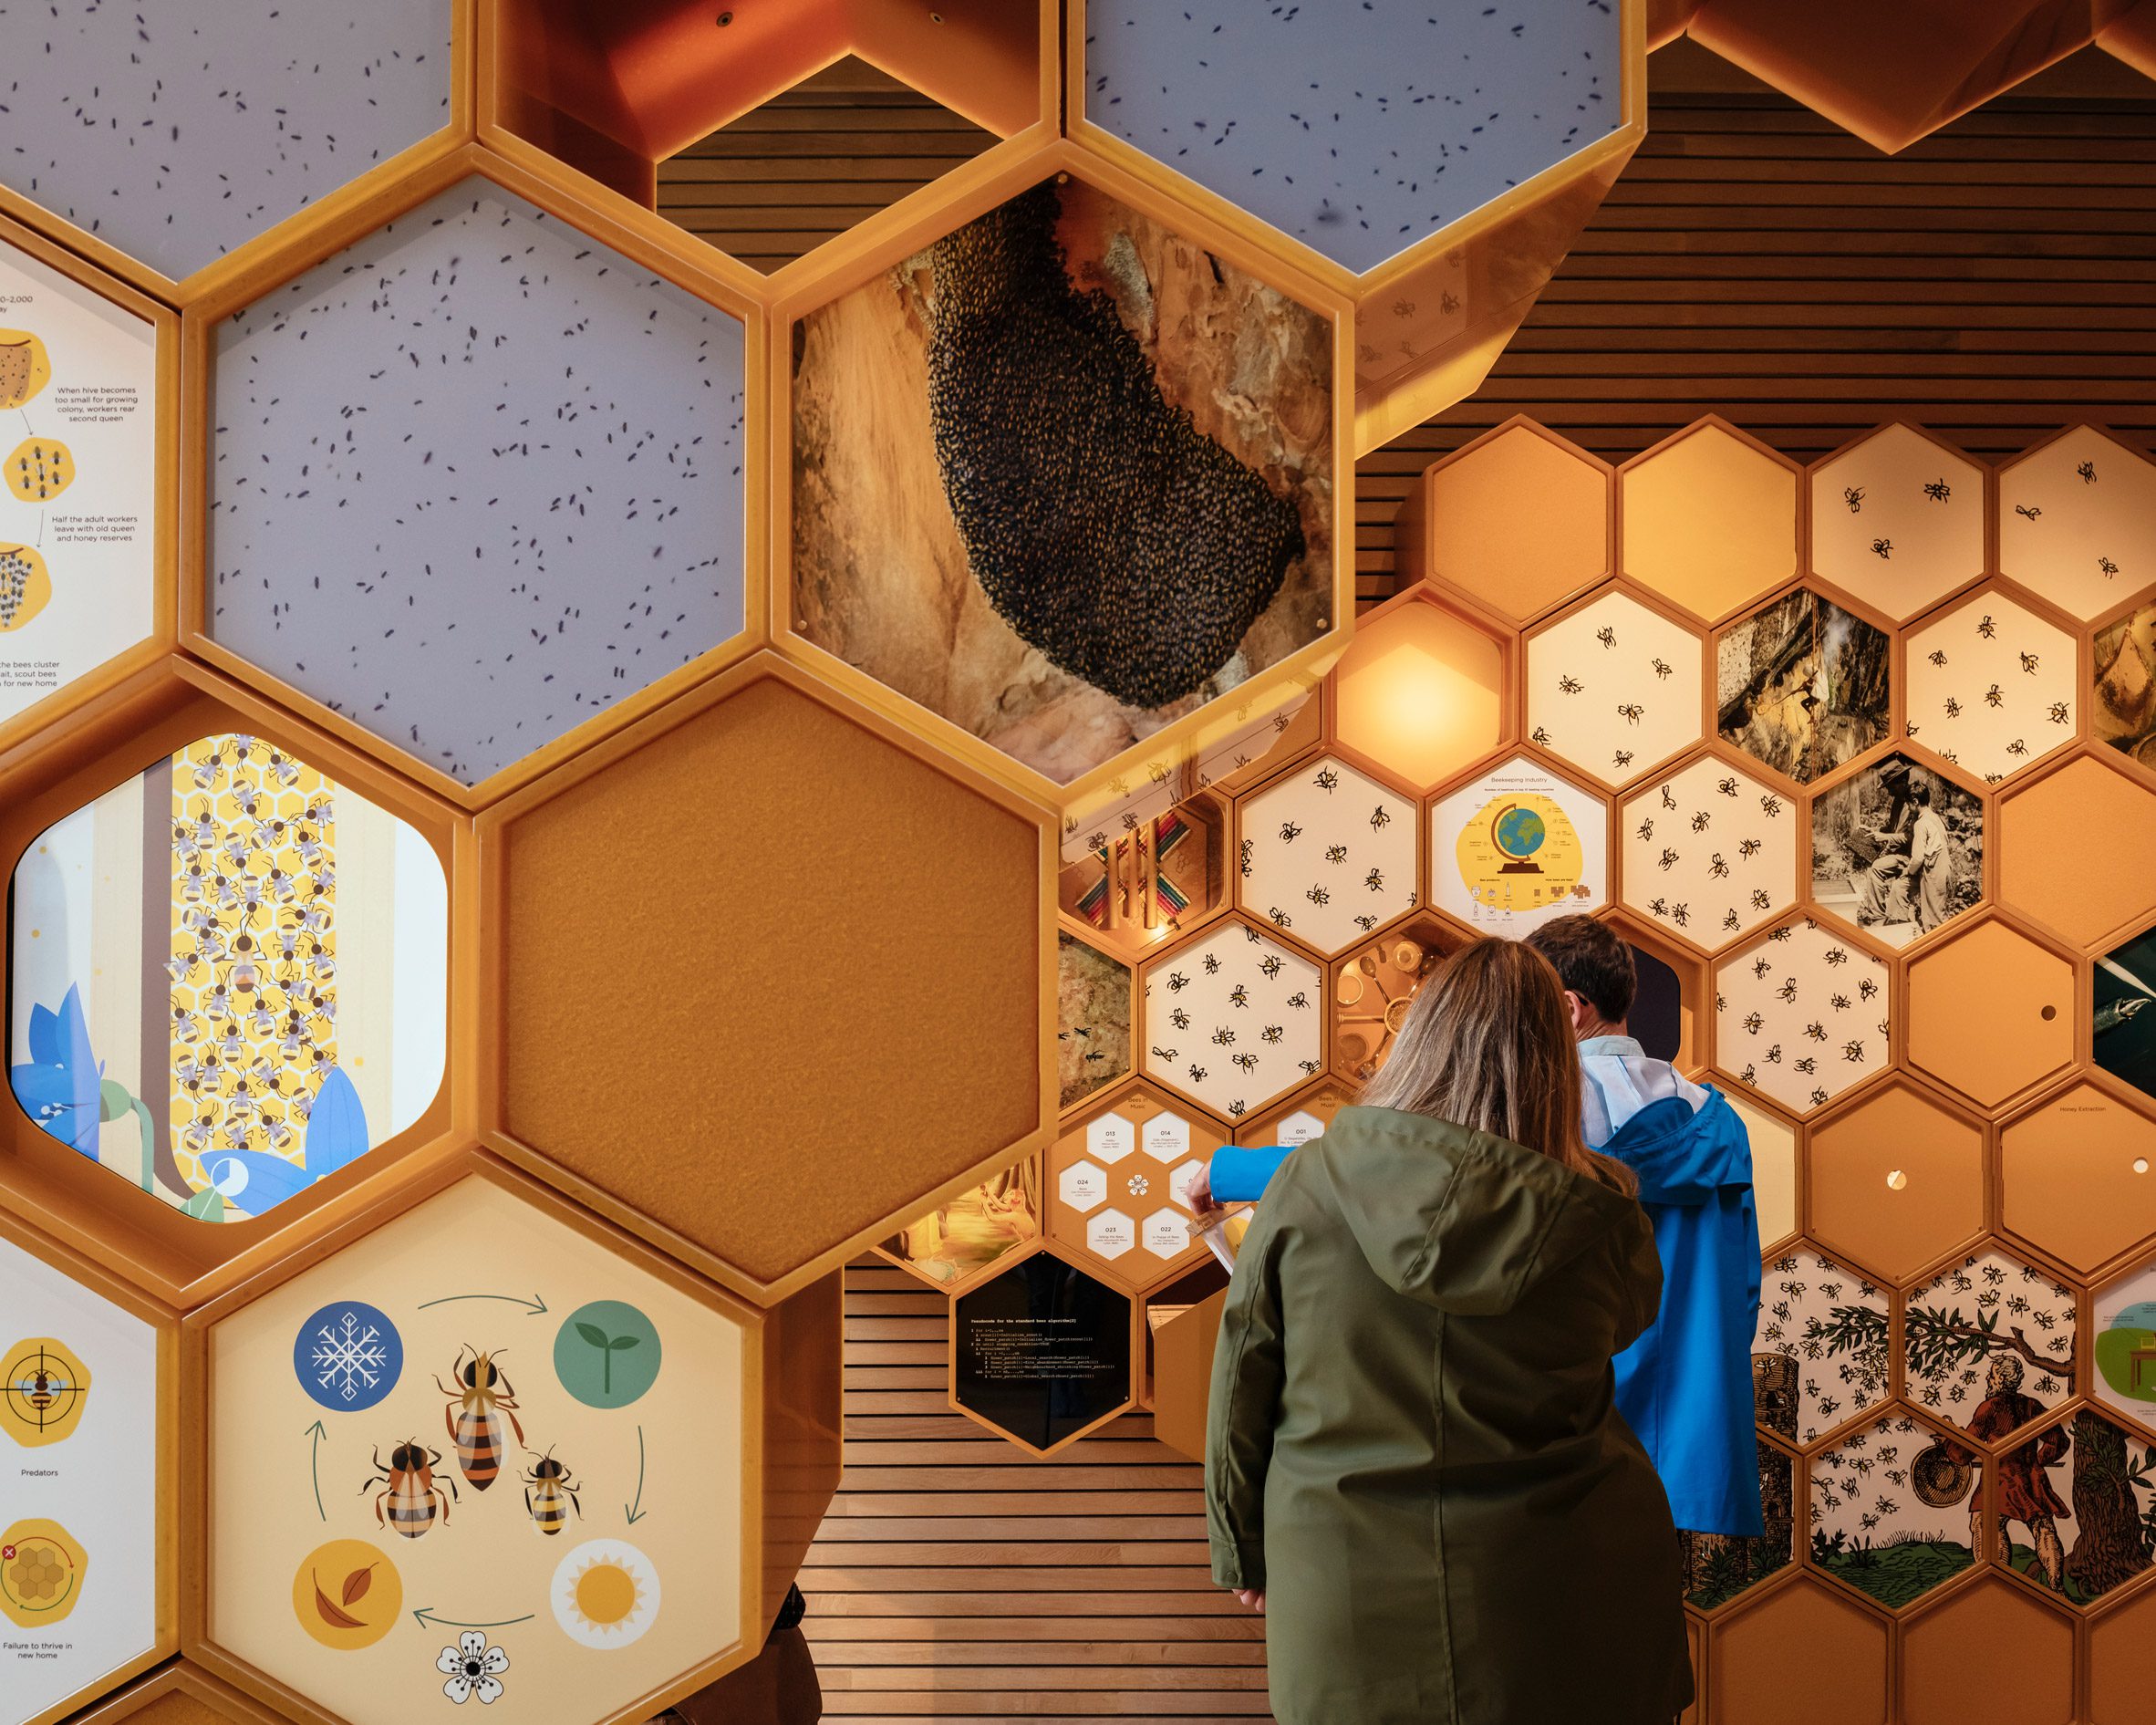 Exhibitions design for The Beezantium by Invisible Studio at The Newt in Somerset